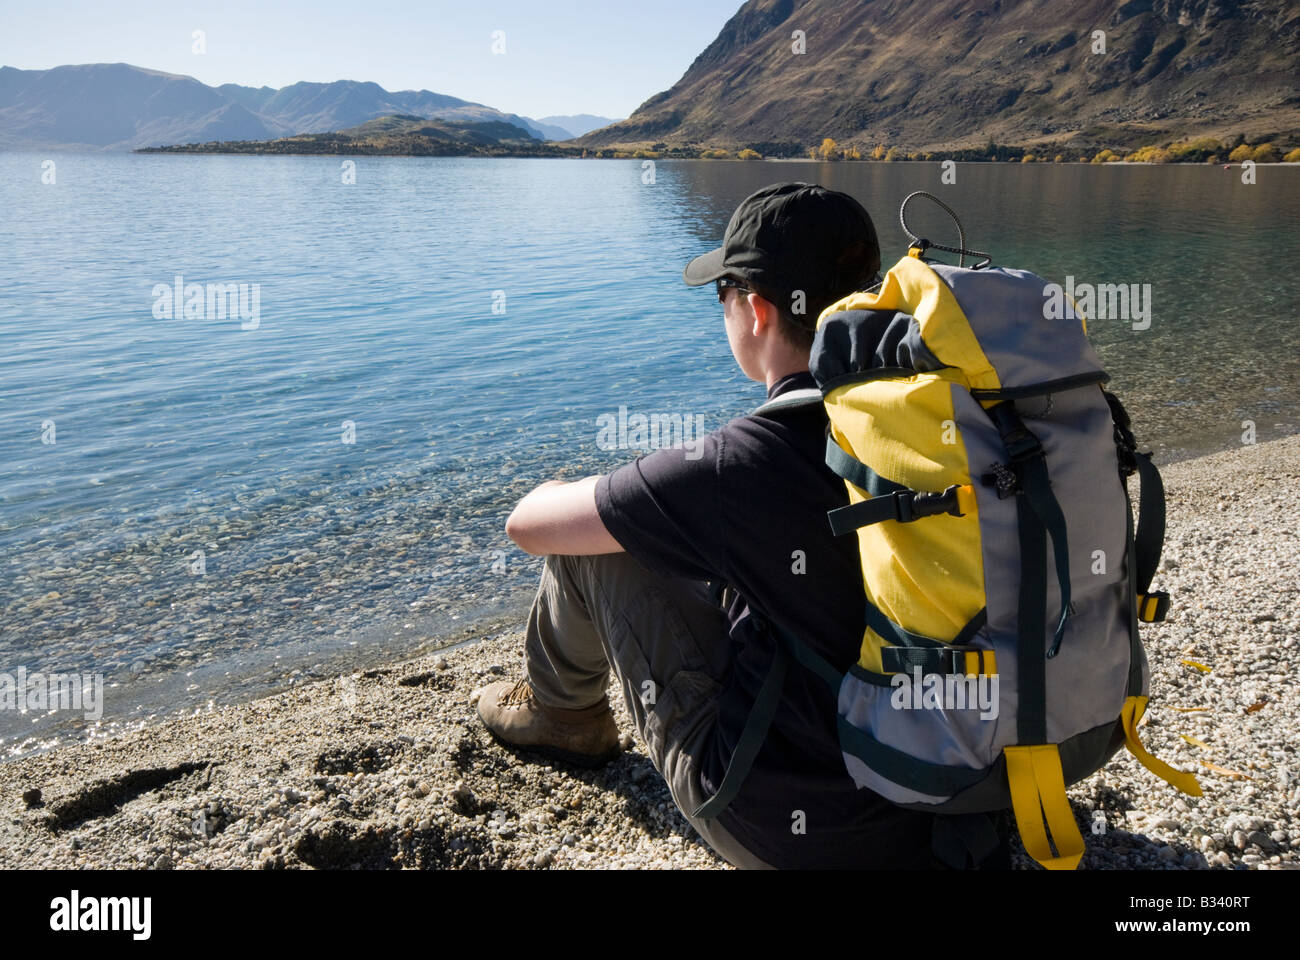 Young hiker sat on lake shore looking out Stock Photo